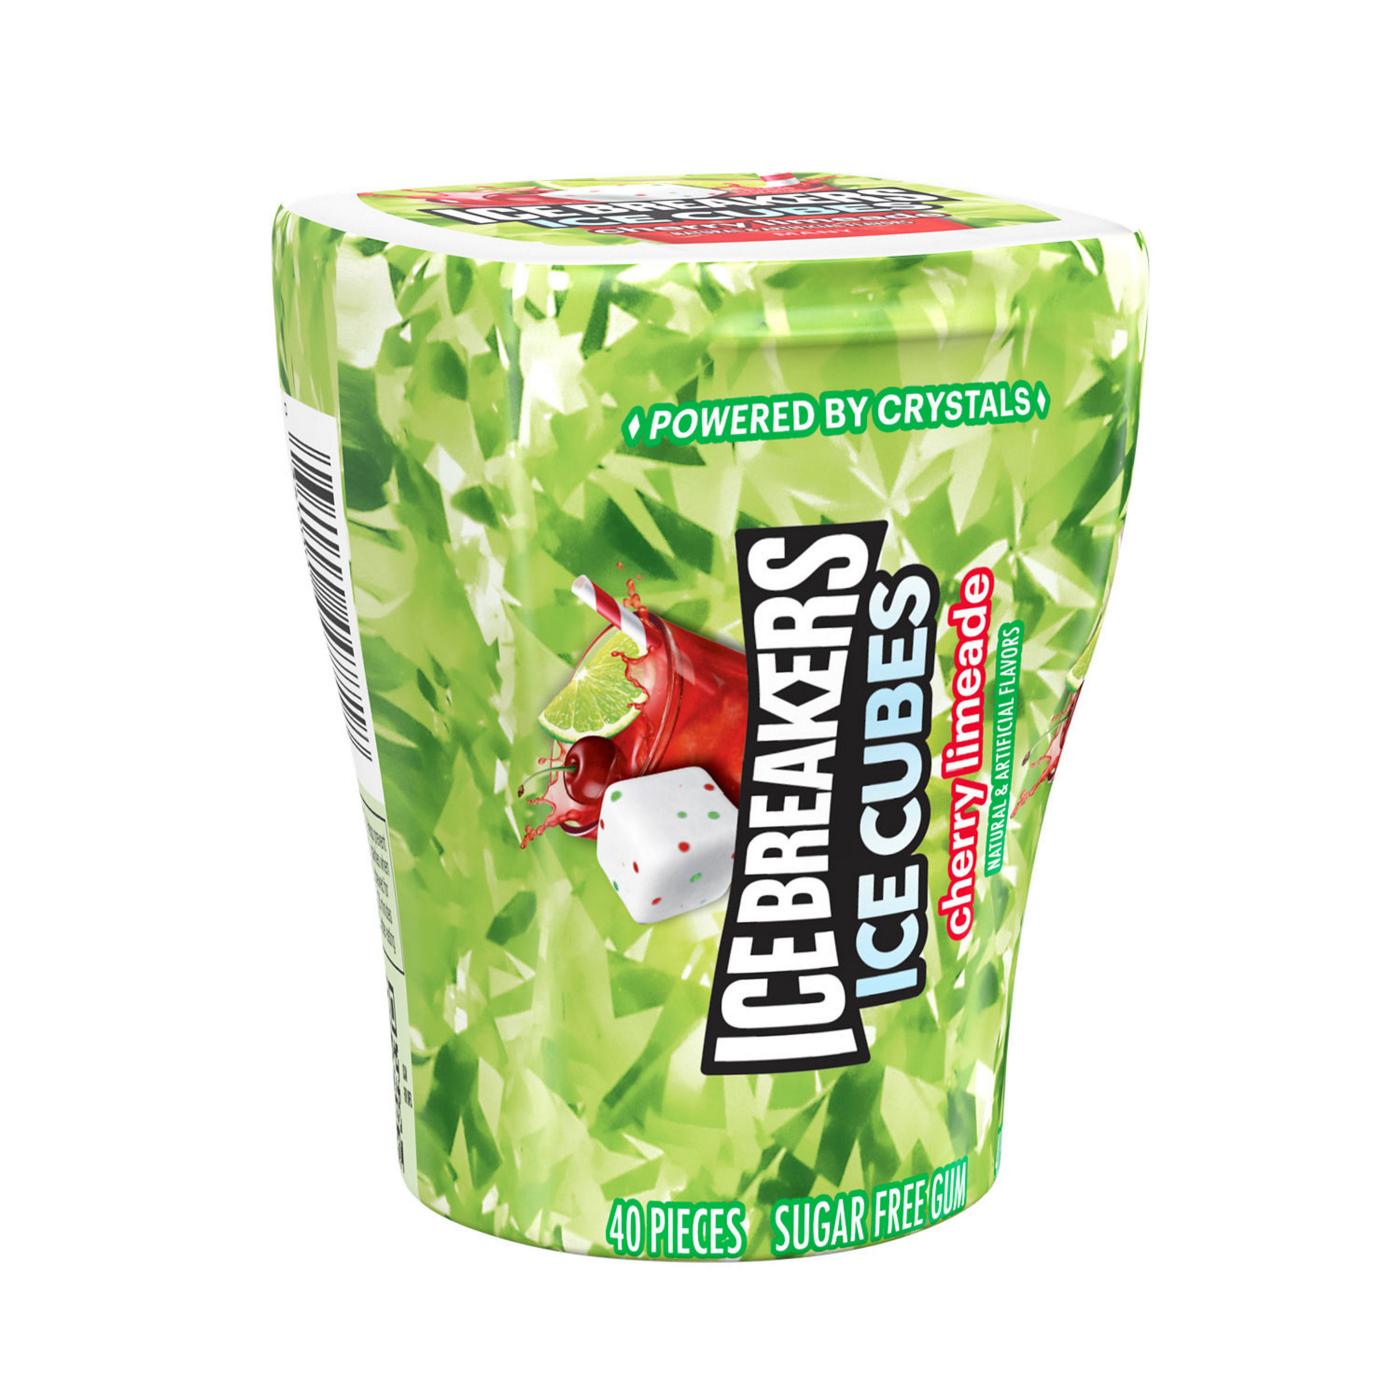 Ice Breakers Ice Cubes Cherry Limeade Sugar Free Gum; image 4 of 4